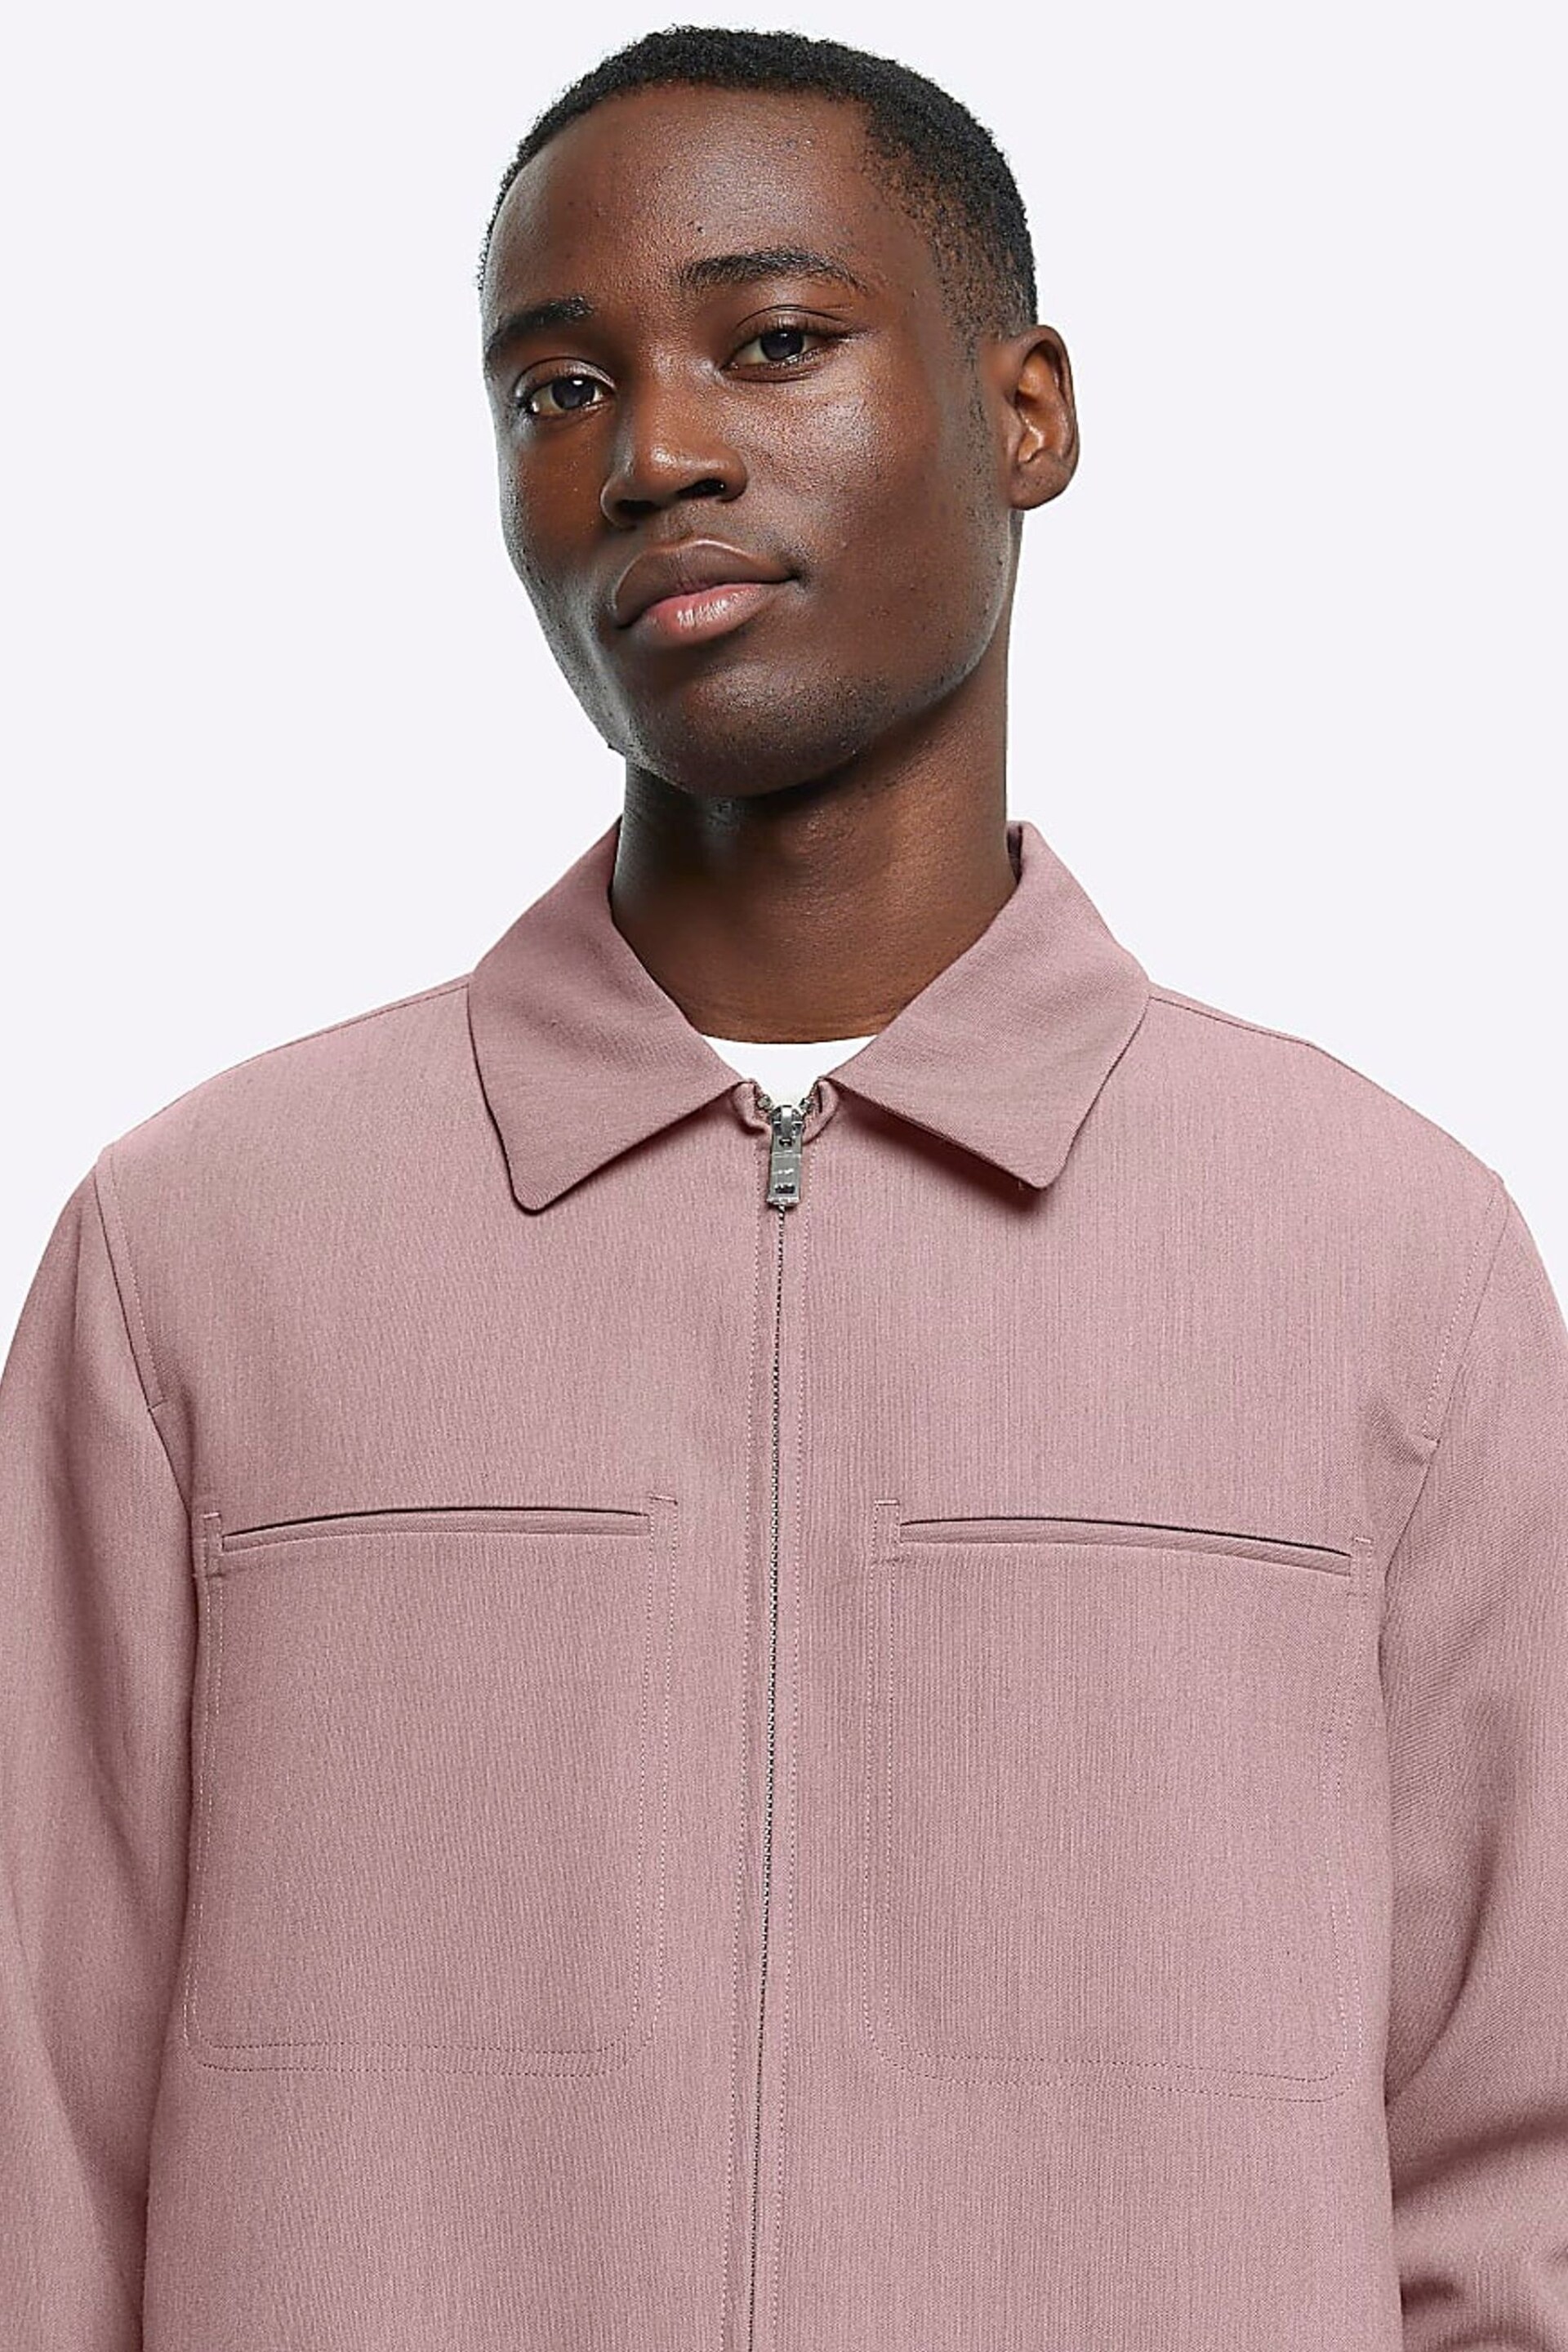 River Island Pink Long Sleeve Essential Crew Sweat Top - Image 4 of 6